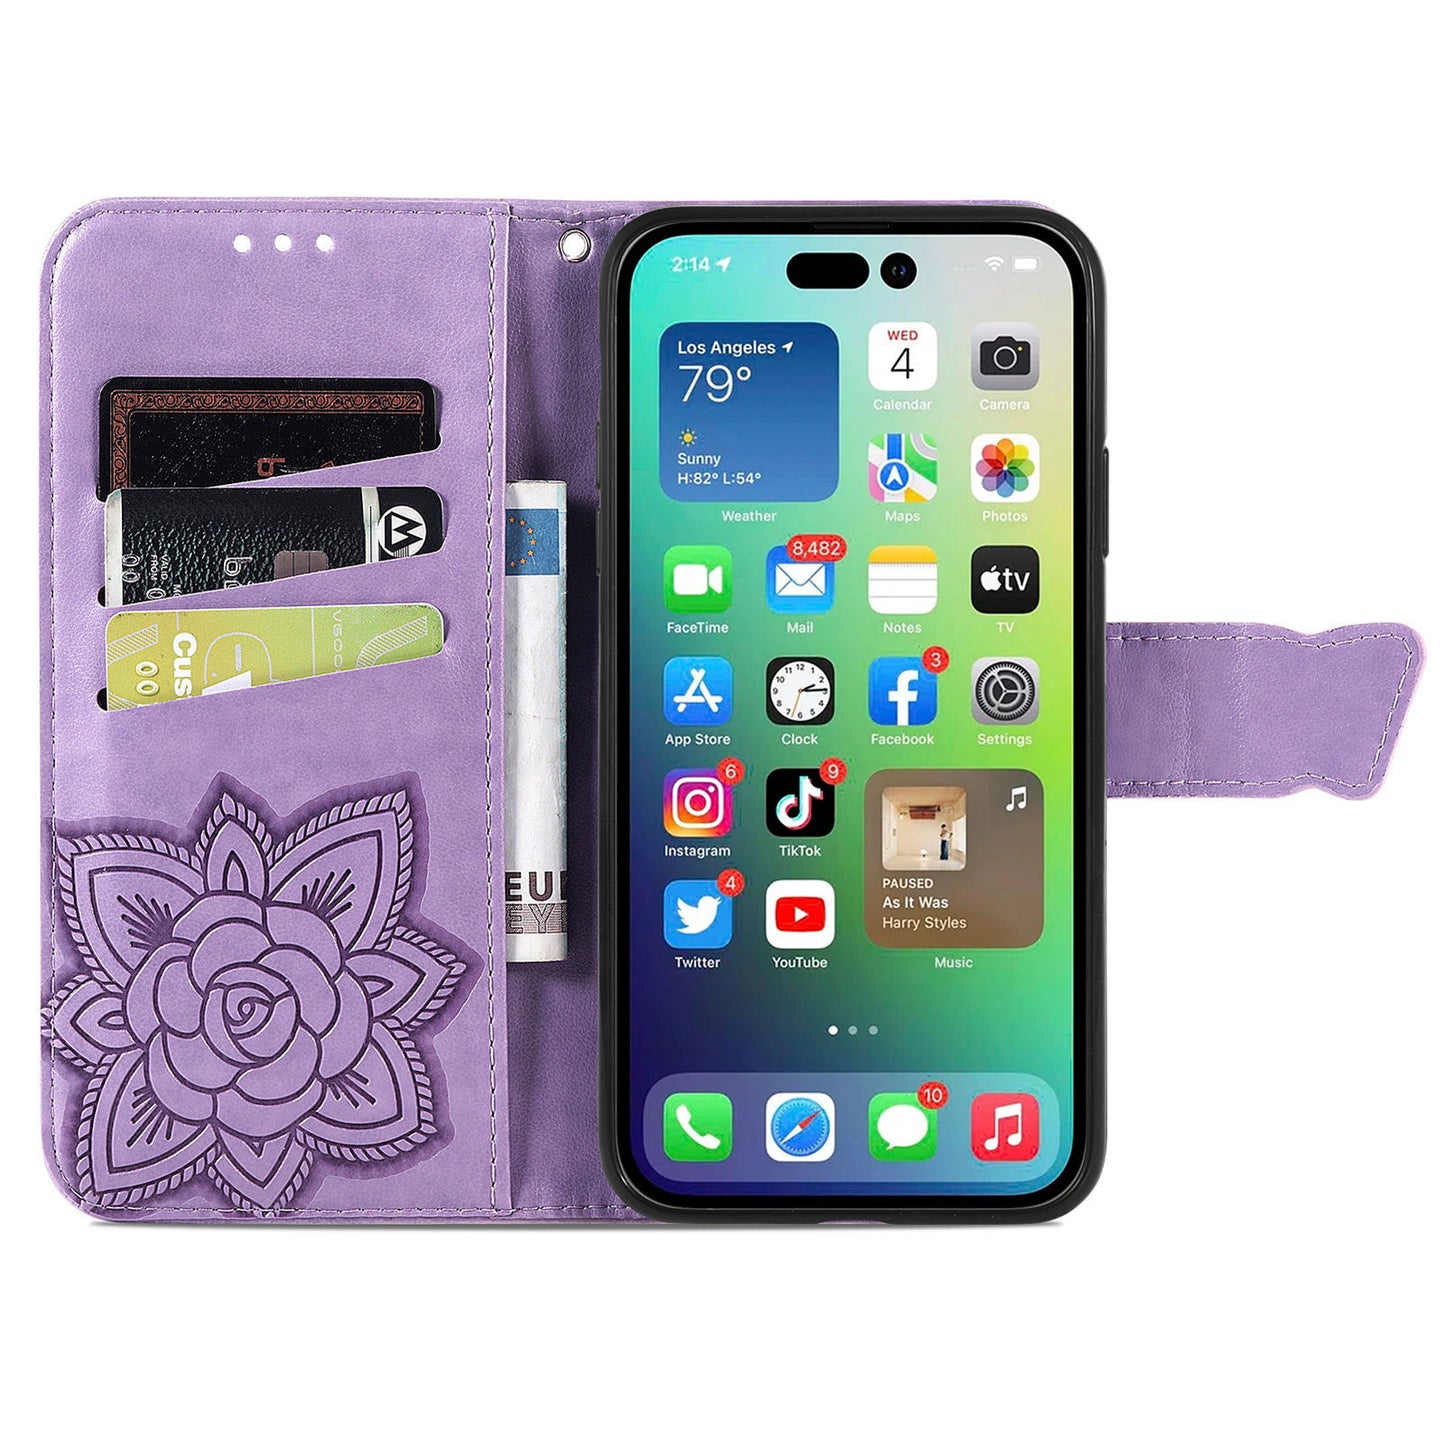 Embossed Butterfly Wallet Flip Case For iPhone